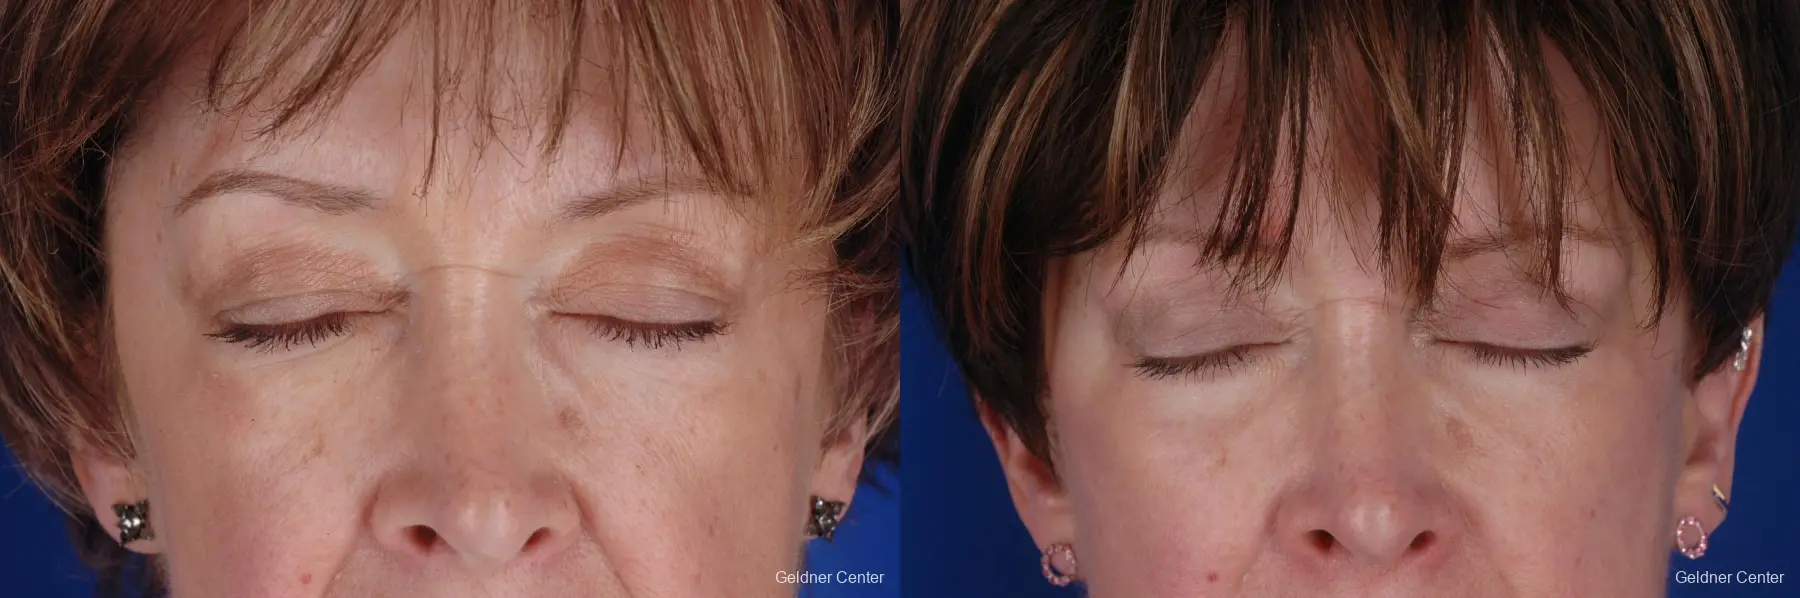 59 year old woman, upper and lower lid blepharoplasty - Before and After 2